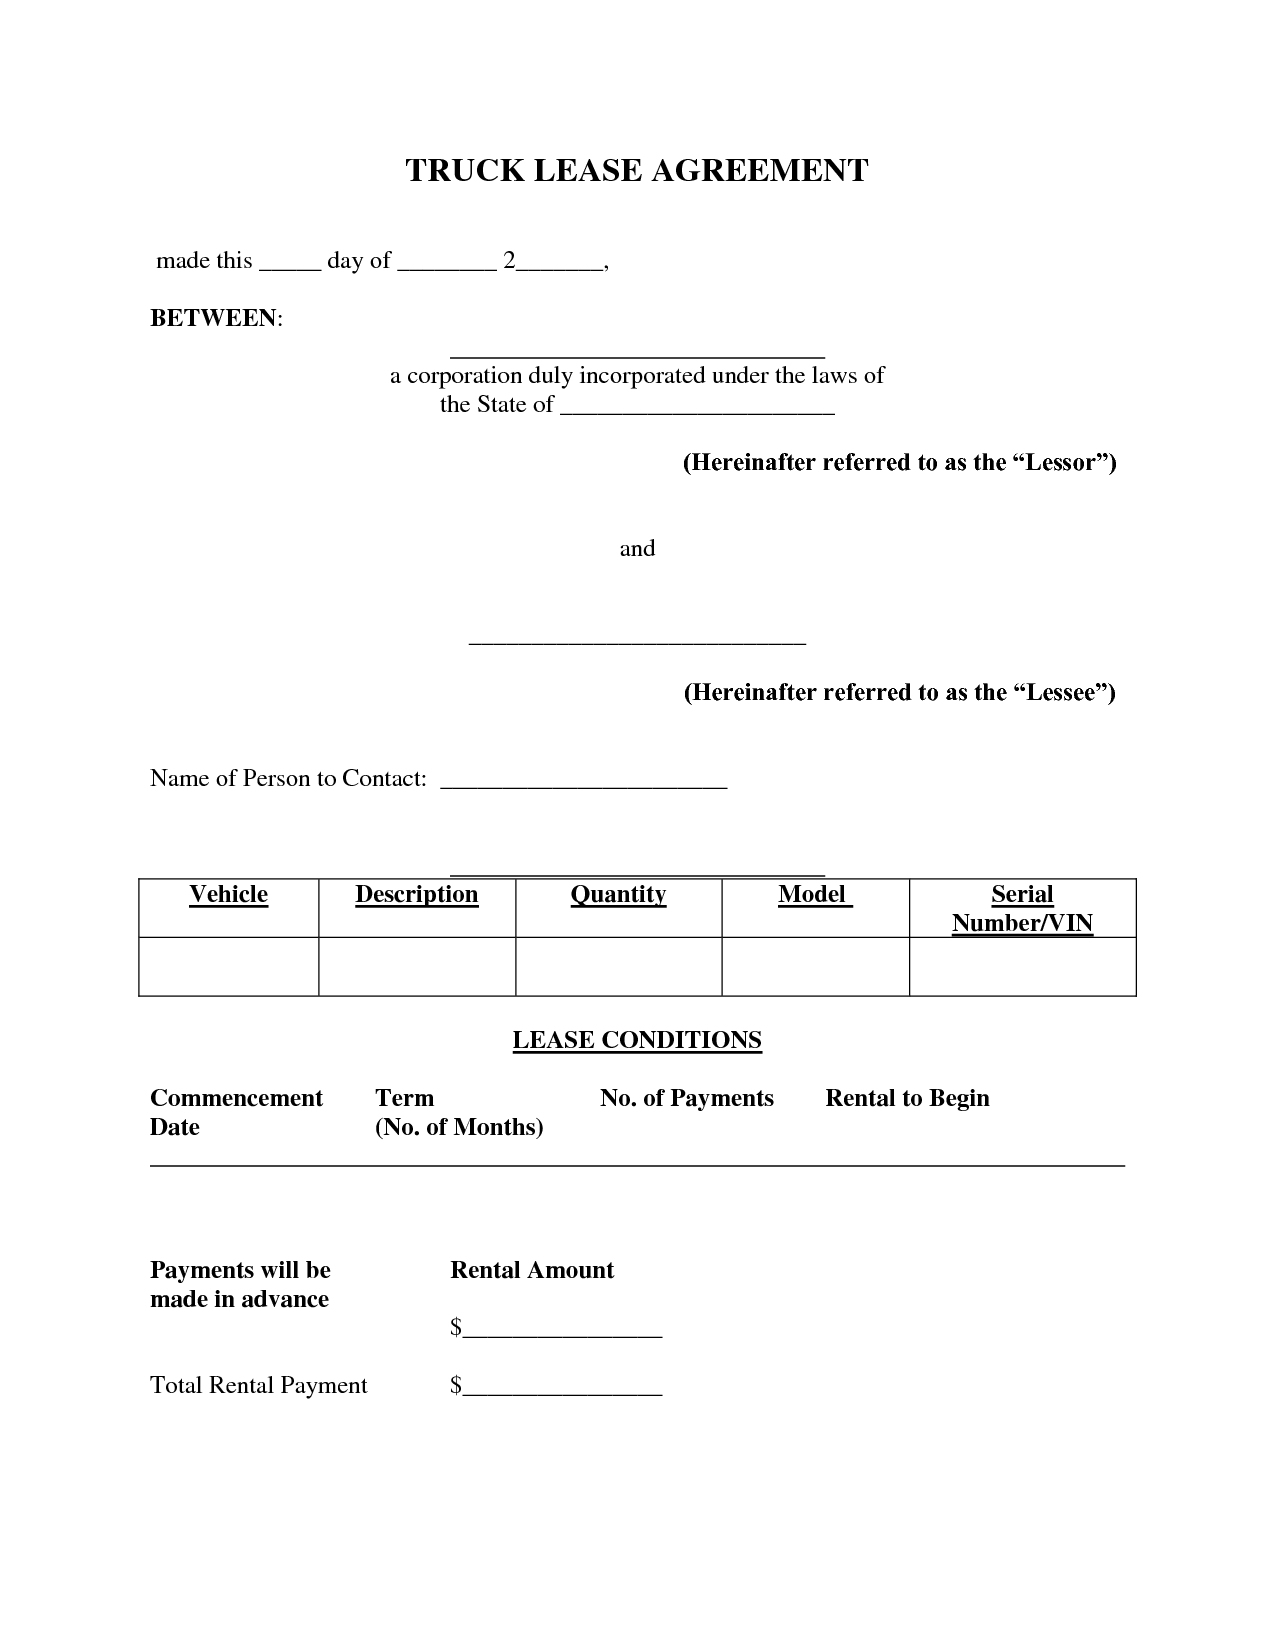 Truck Lease Agreement Template Trailer Lease Agreement Form 40995 Best S Of Mercial Truck Lease